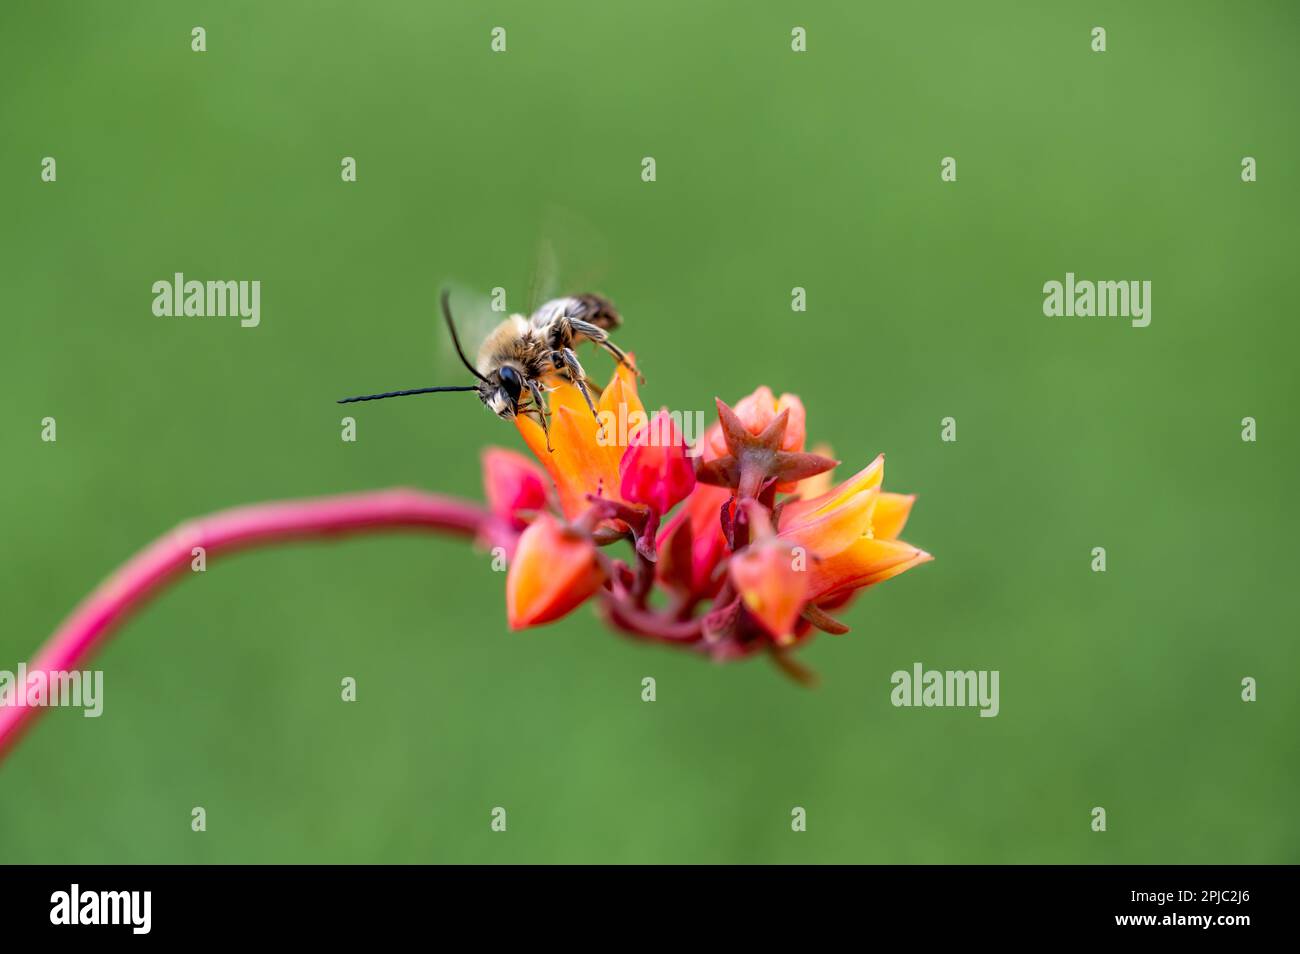 Long-horned bee (Eucera longicornis) perched on red flowers of succulent plant Stock Photo